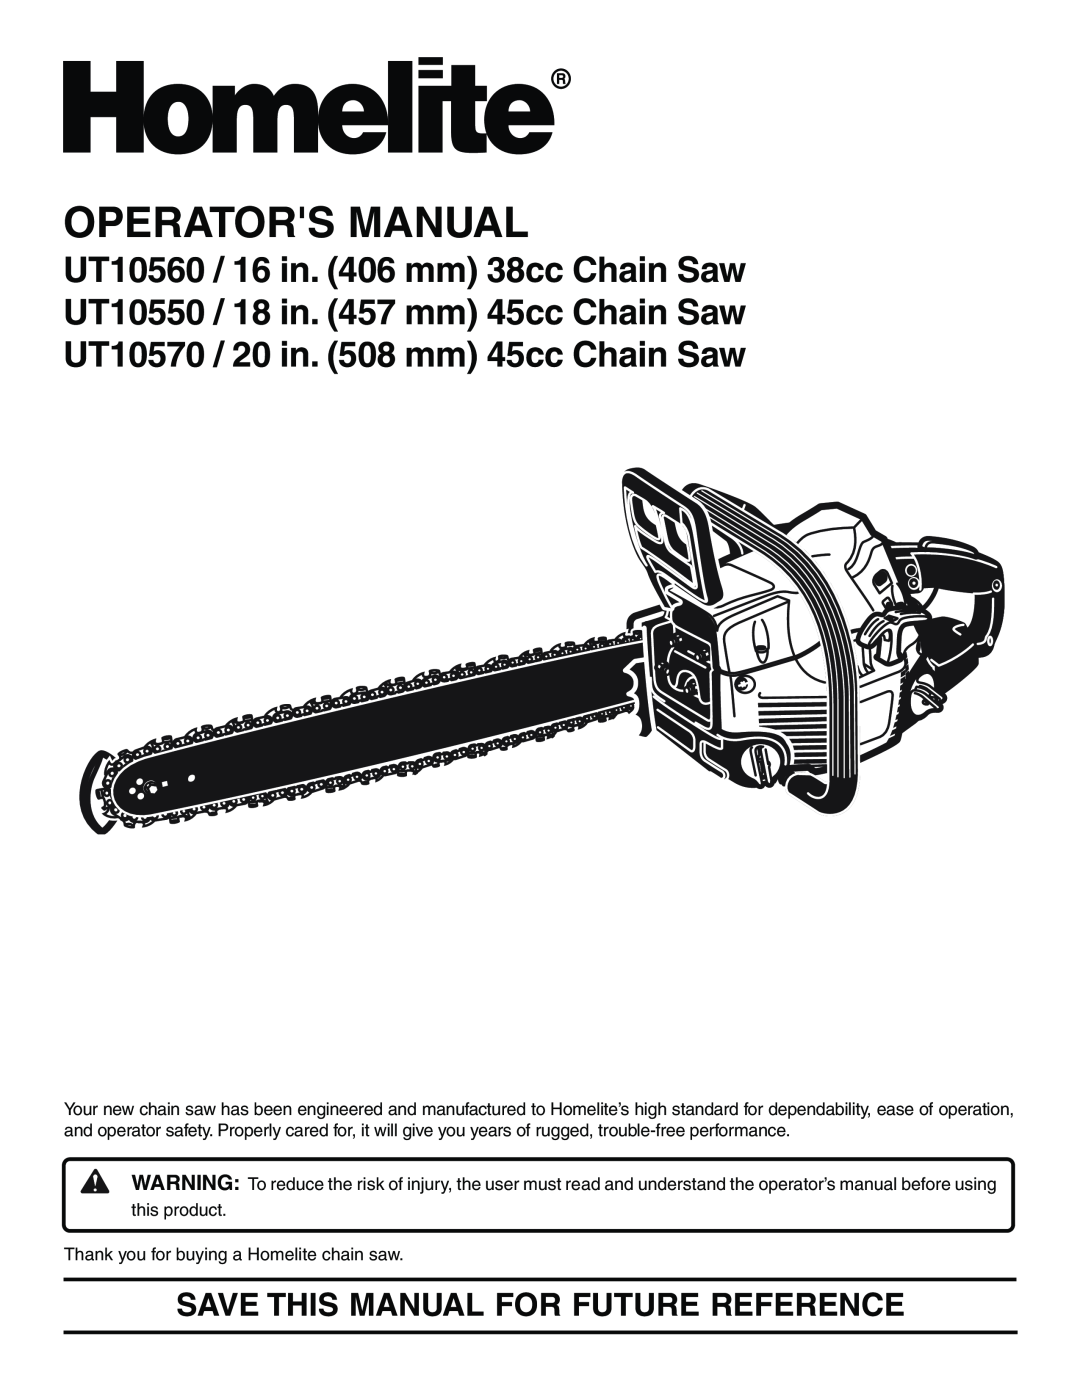 Homelite UT10570 manual Operators Manual, Save This Manual For Future Reference, UT10560 / 16 in. 406 mm 38cc Chain Saw 